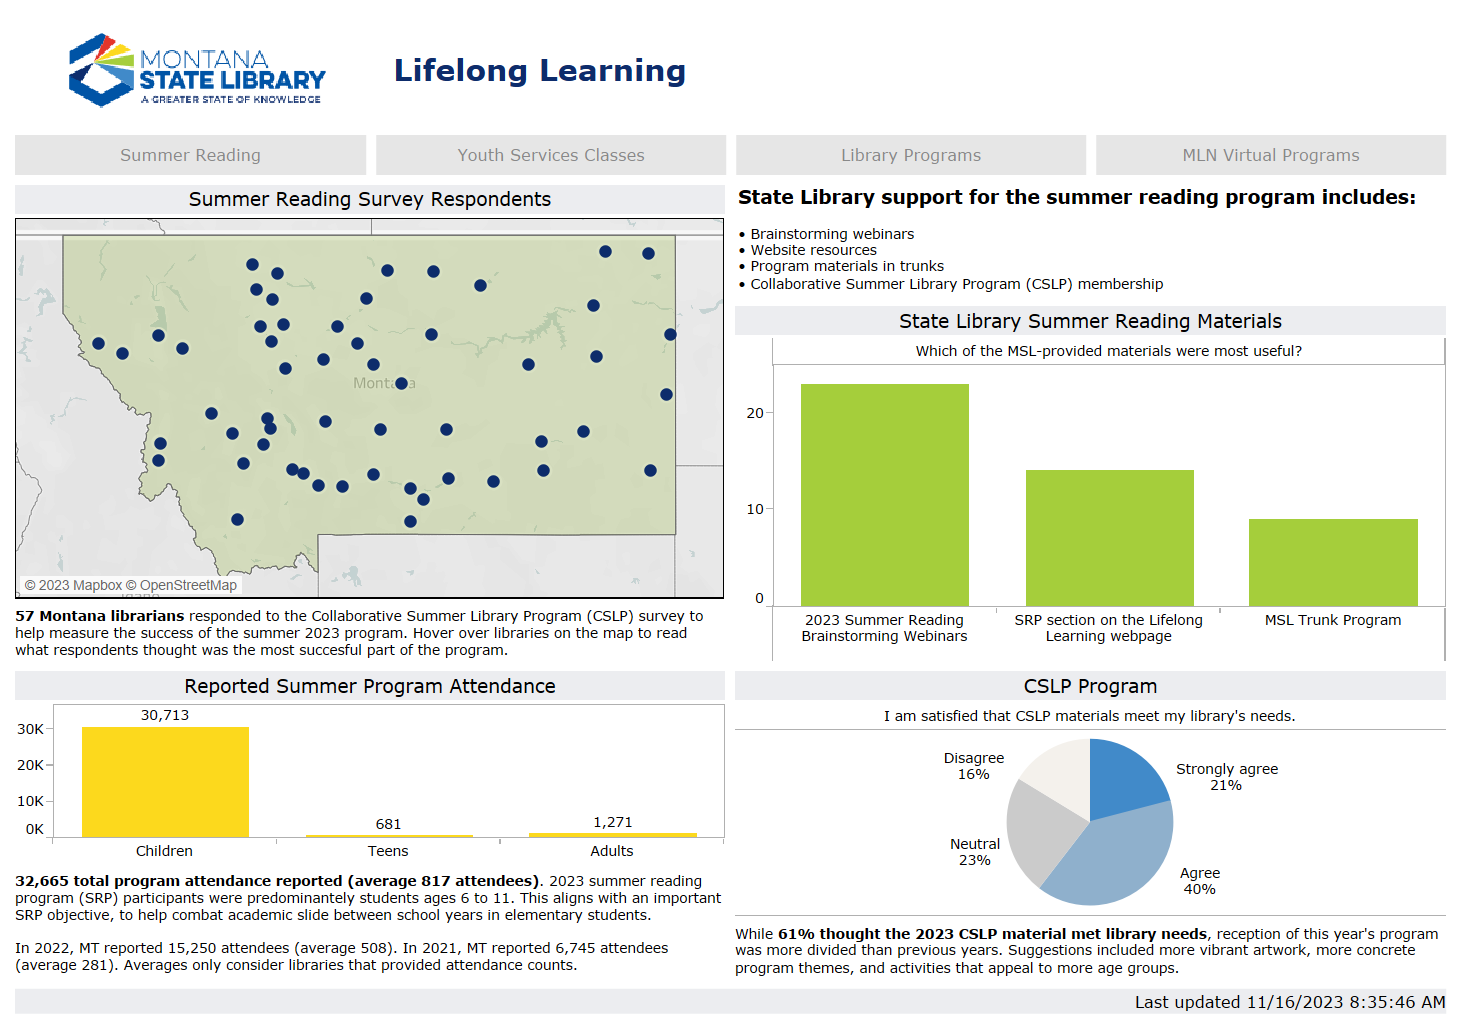 Screenshot of the lifelong learning dashboard page on summer reading